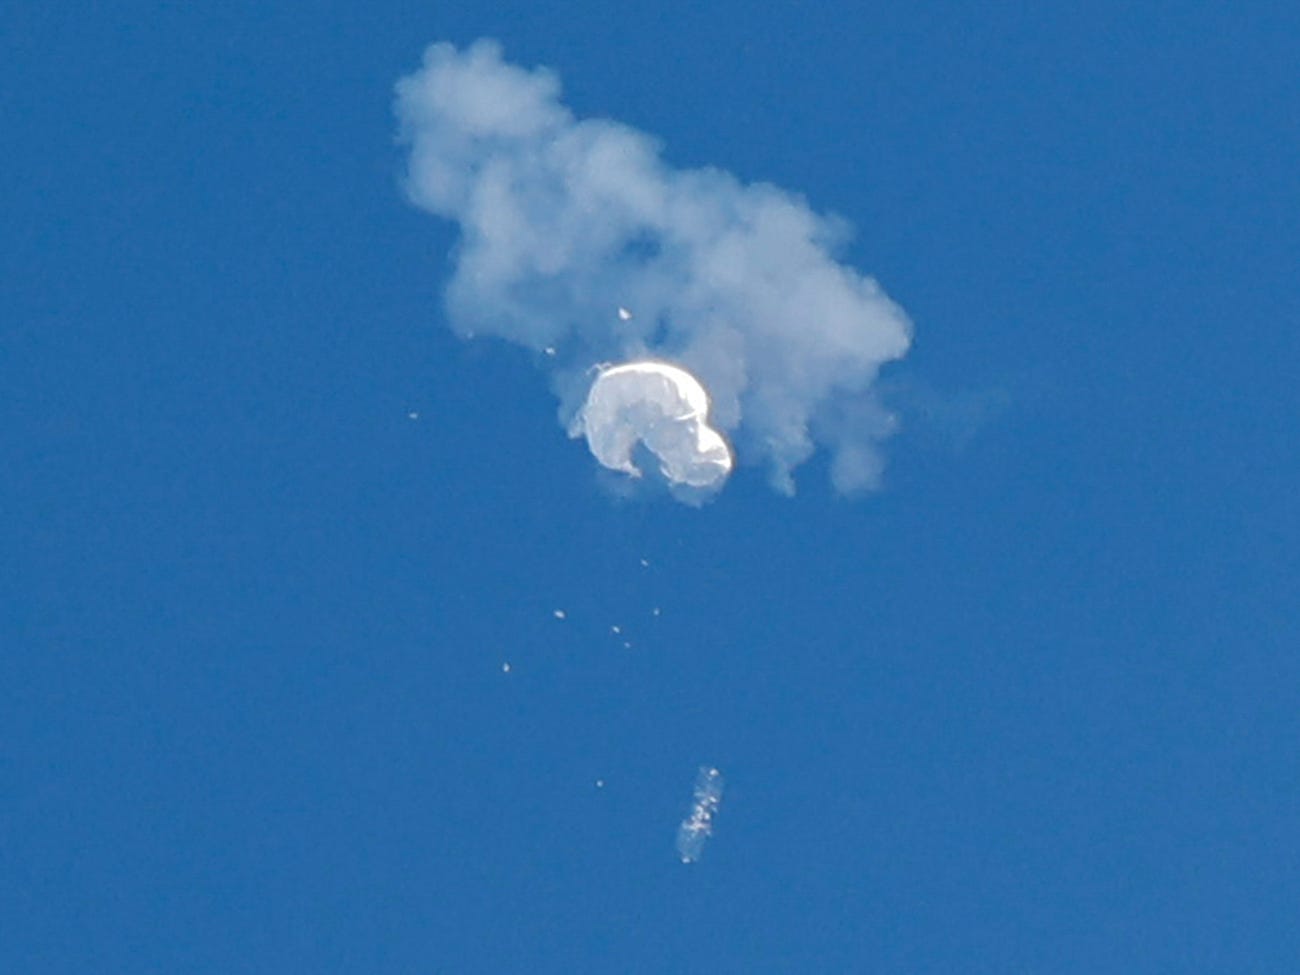 Suspected Chinese Spy Balloon Could be Part of a Wider Snooping Effort